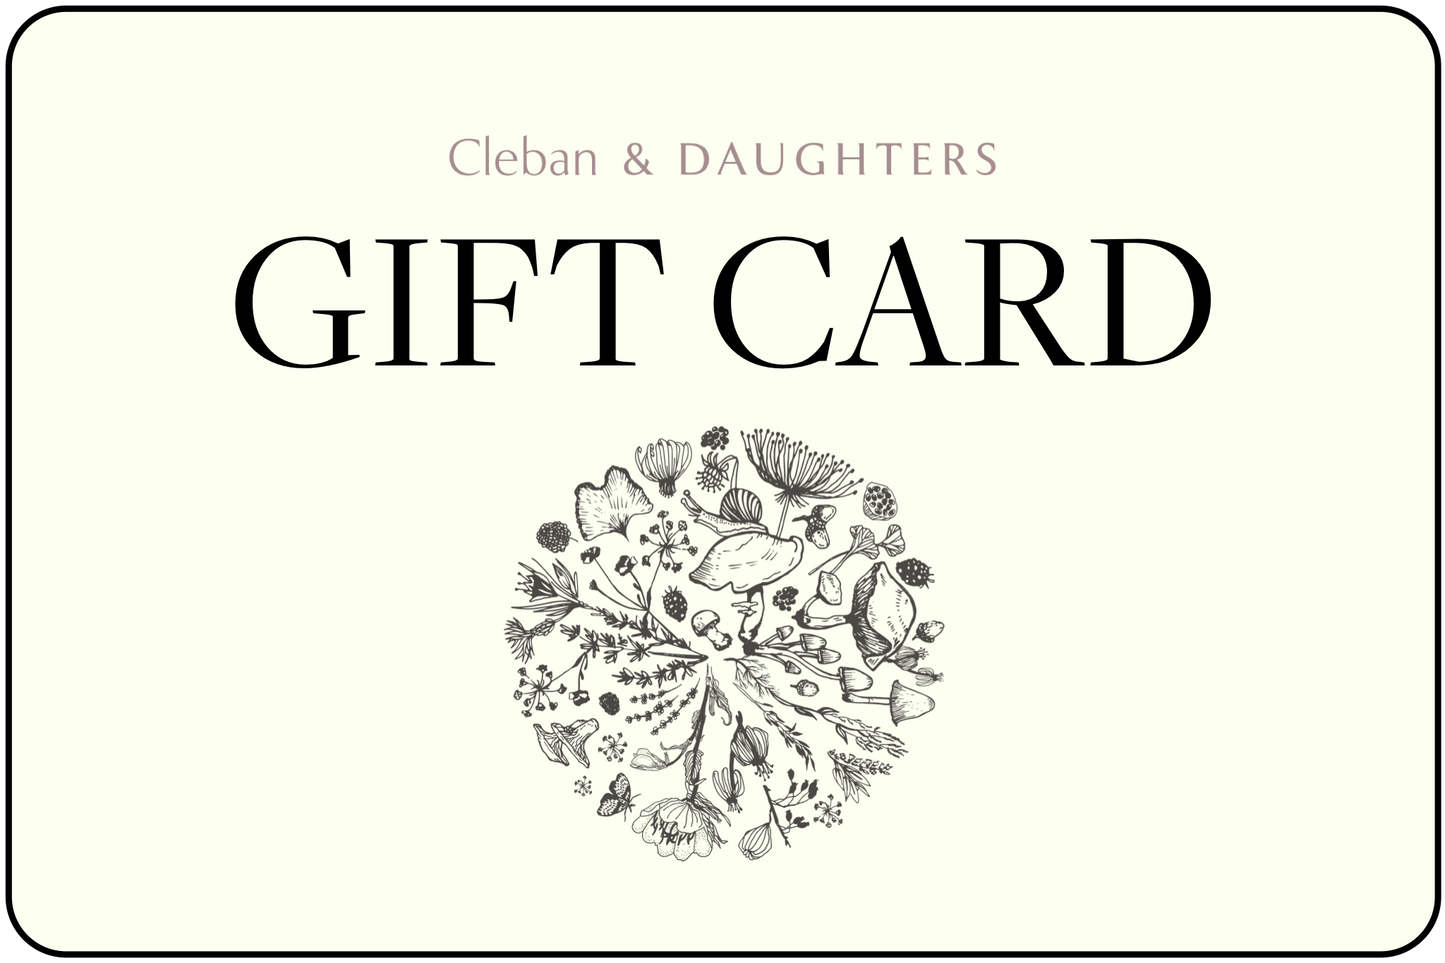 Cleban & Daughters Gift Card